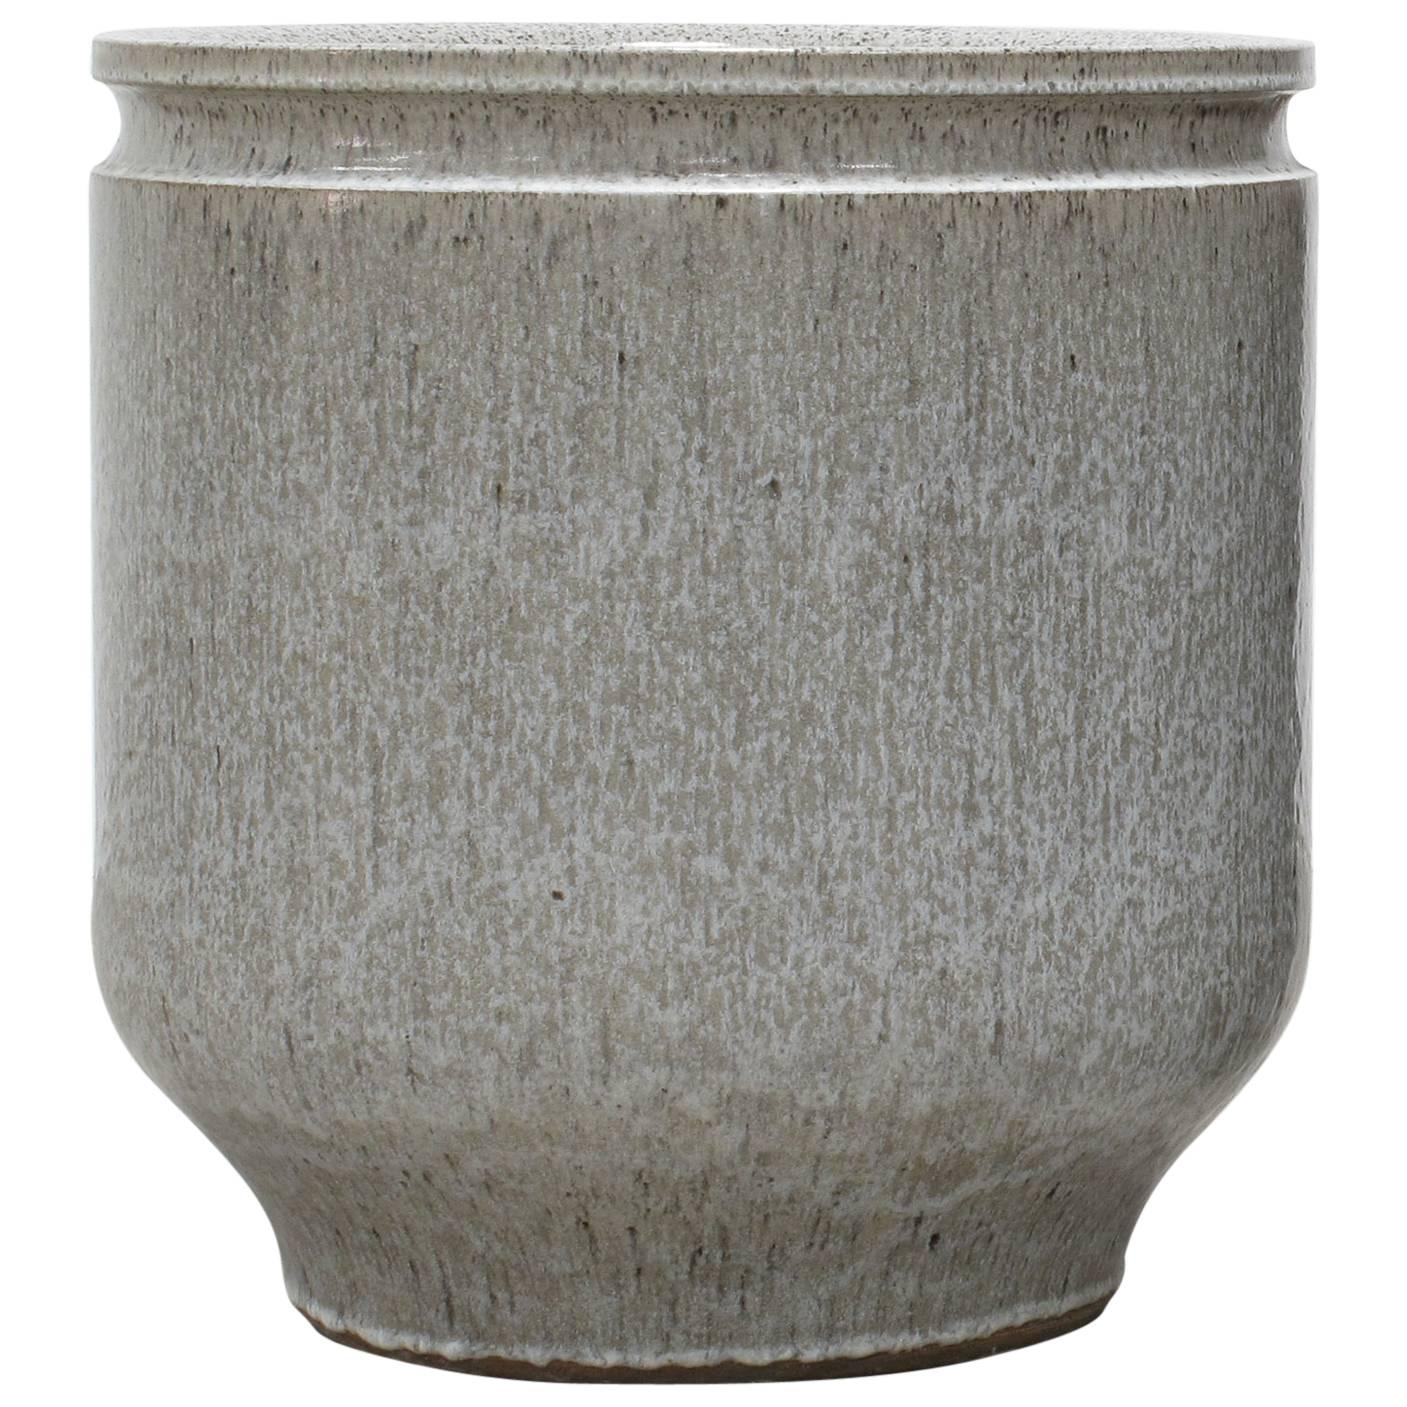 David Cressey and Robert Maxwell Large Glazed Grey Ceramic Planter, 1970s For Sale